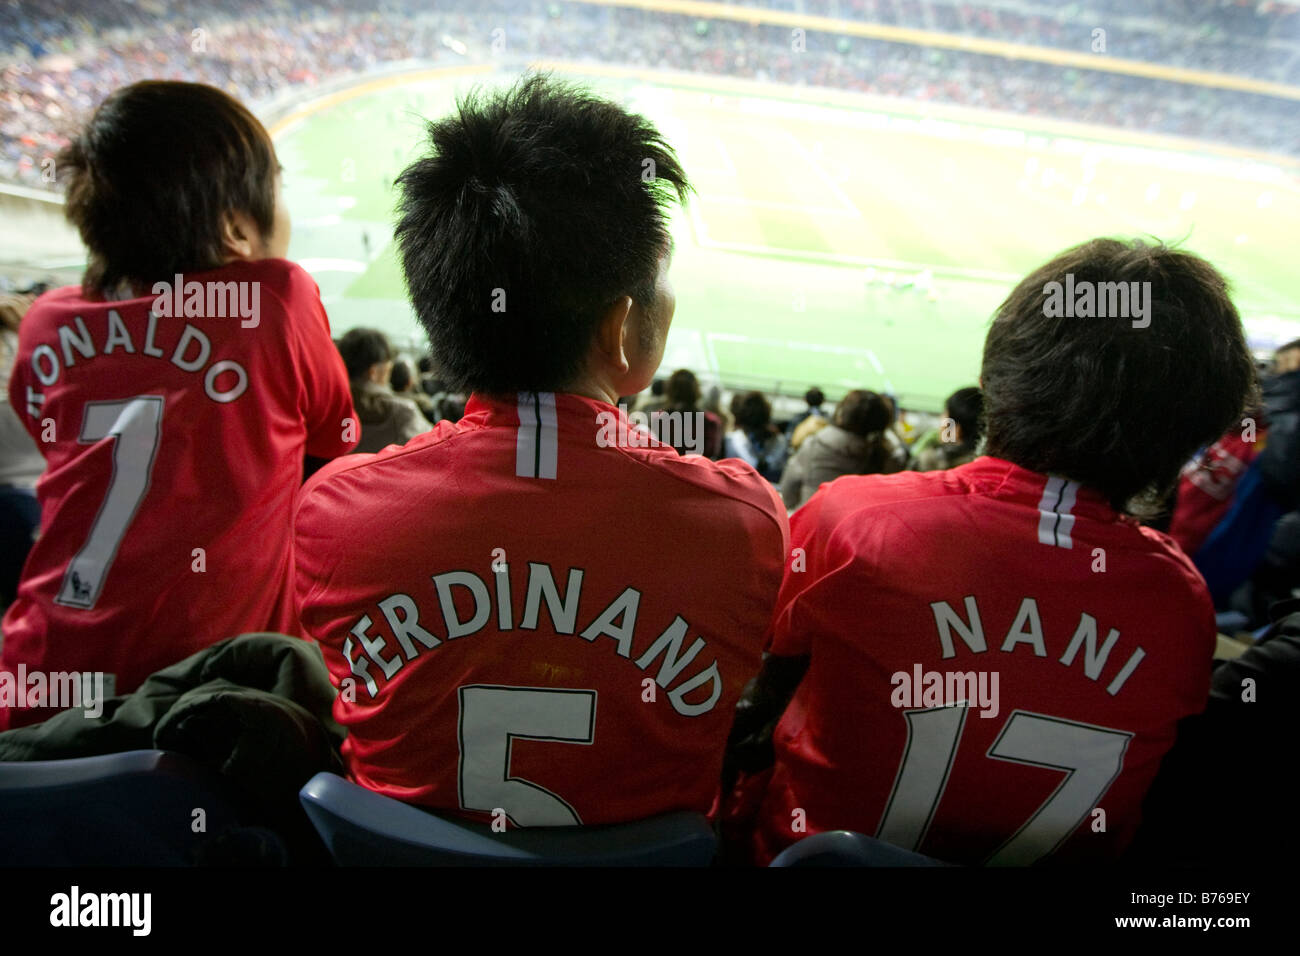 Japanese Manchester United football fans wearing strips bearing names of their idols/ players. Stock Photo